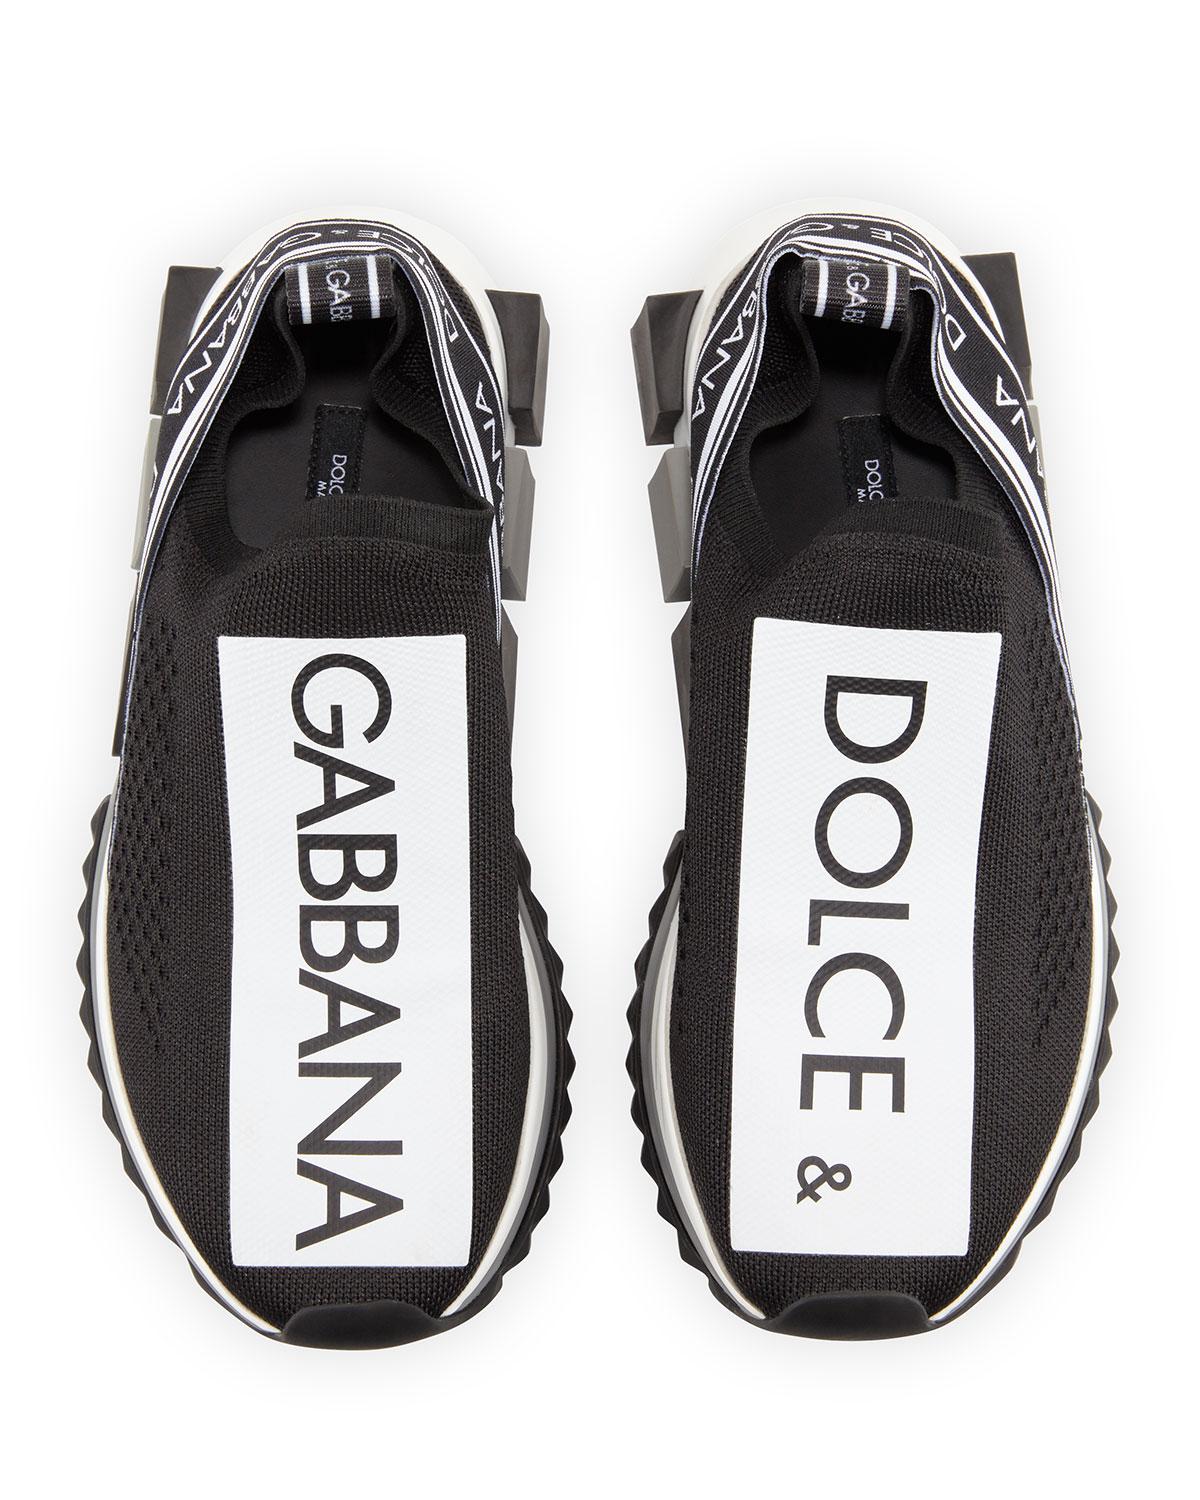 Dolce & Gabbana Rubber Sorrento Knit Trainer Sneakers in Black - Lyst